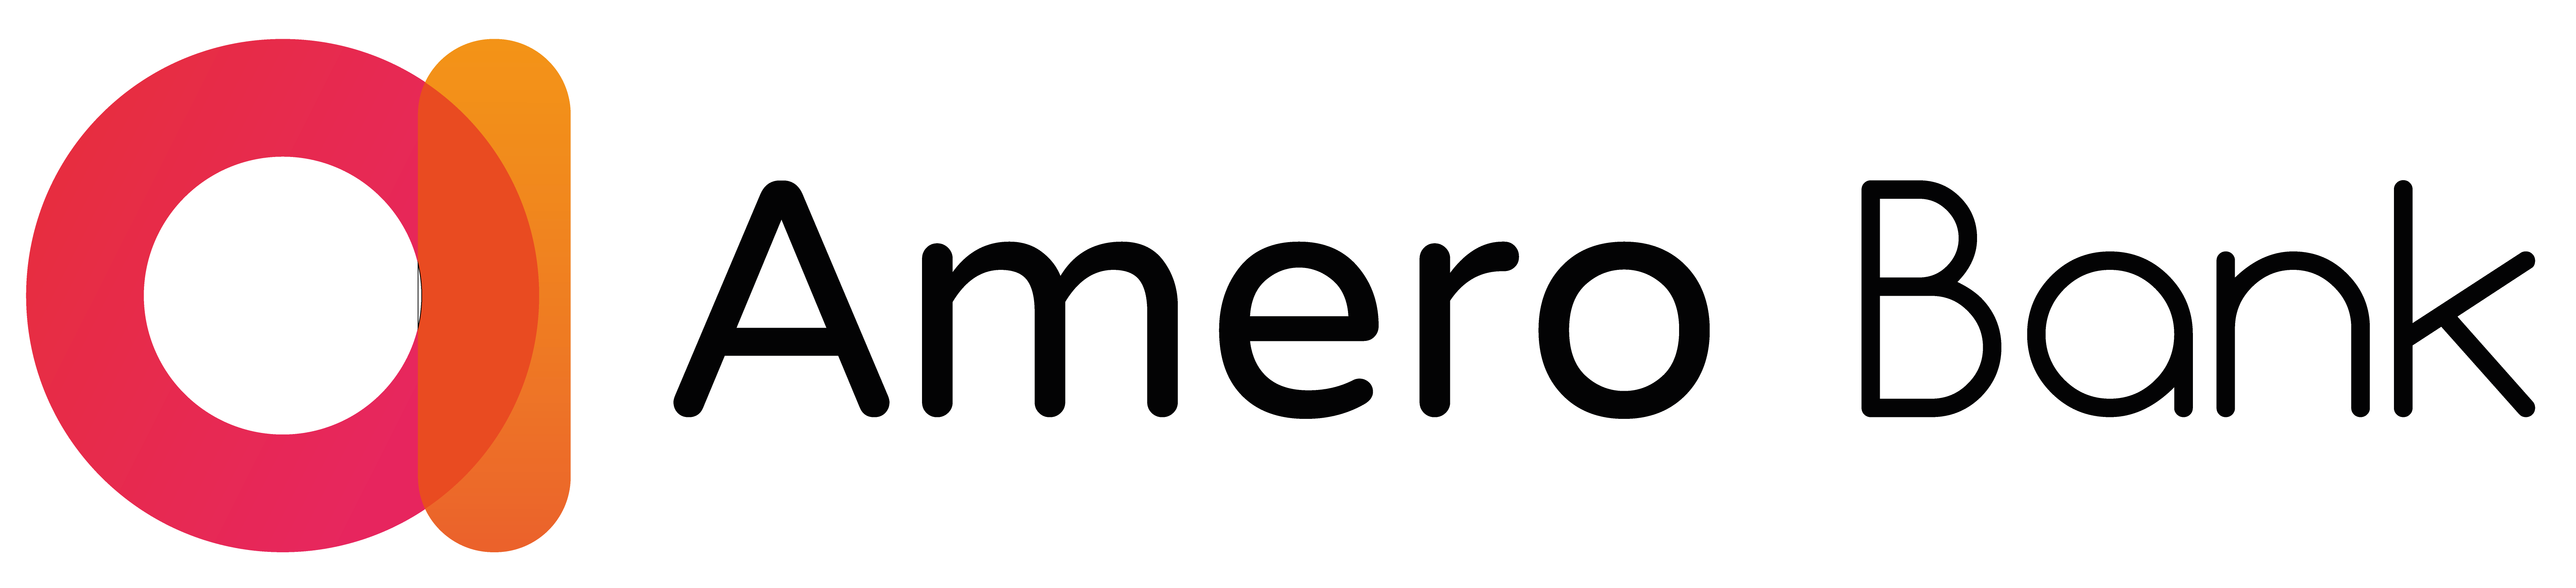 Amero Bank Officially Launches With Their Digital Assets Savings Solution